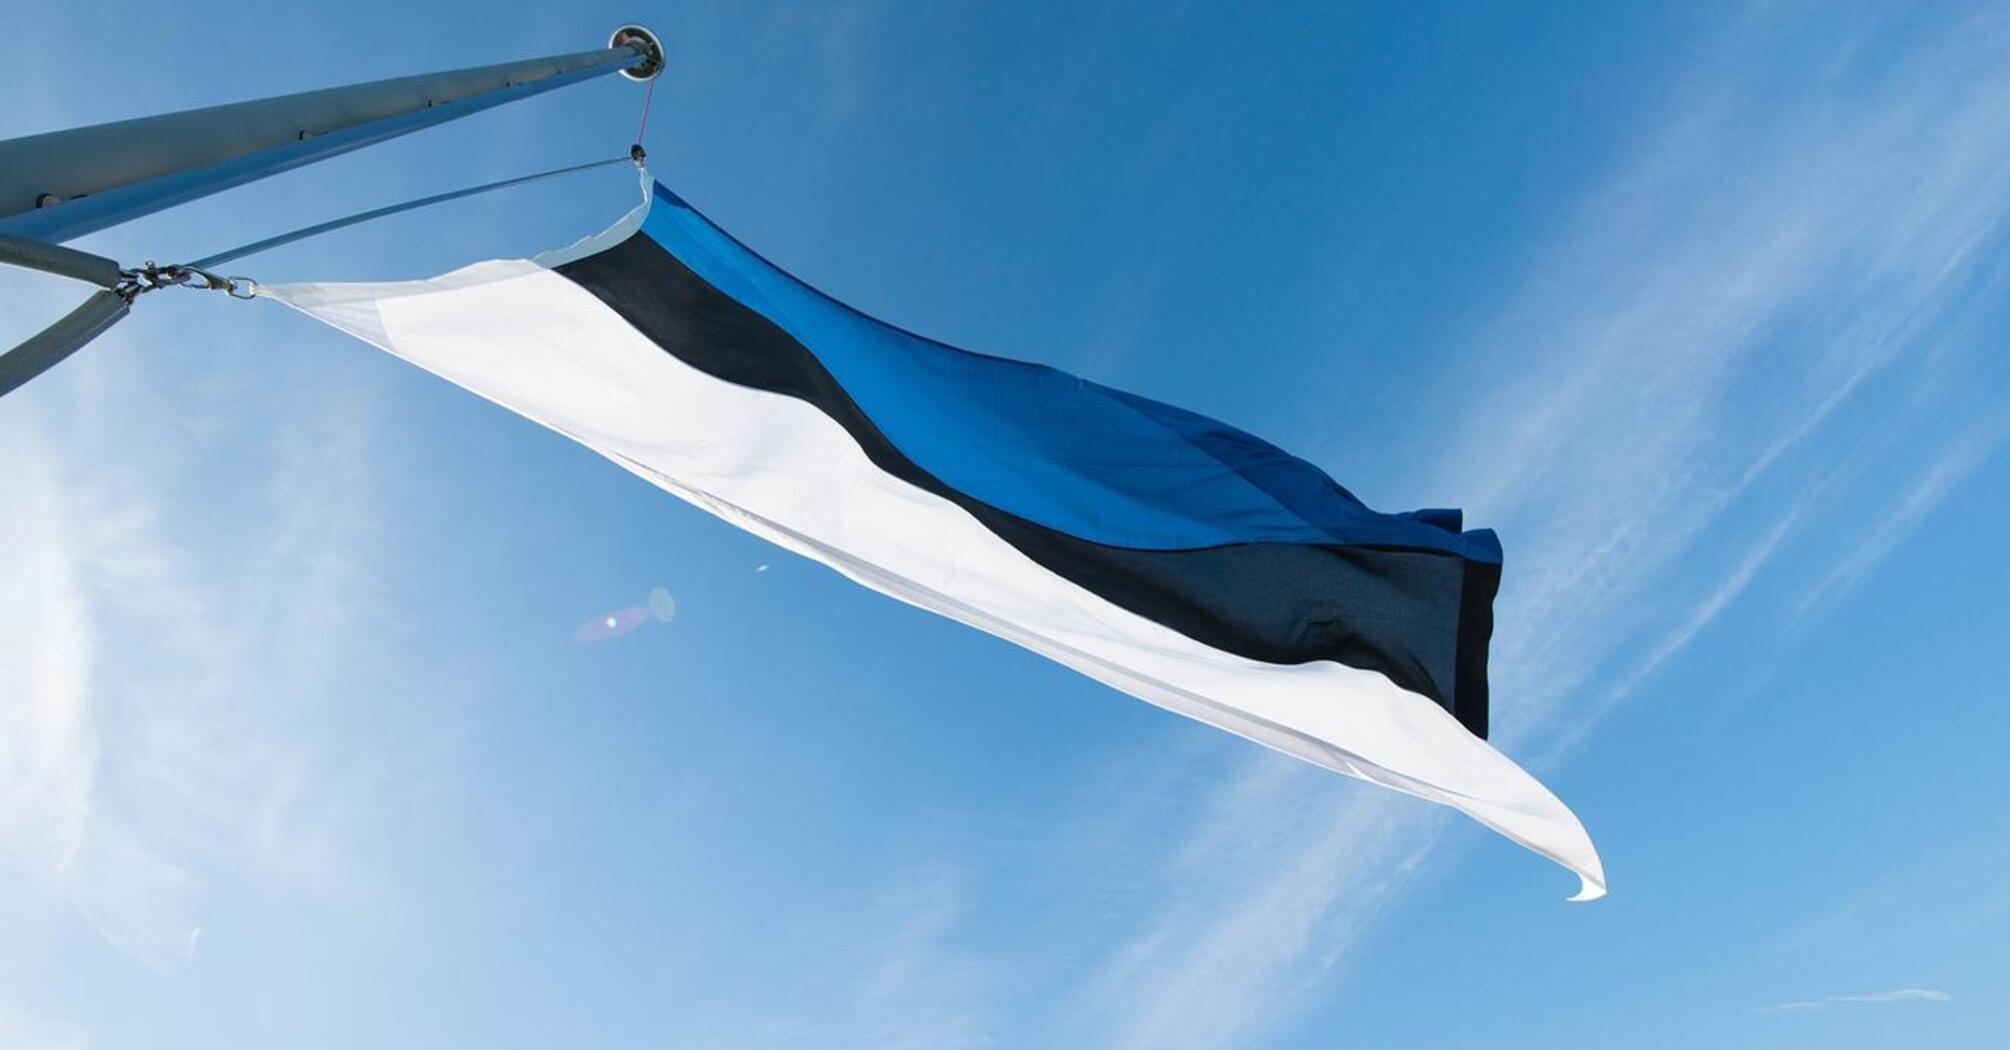 Estonia is the first country to make an important decision